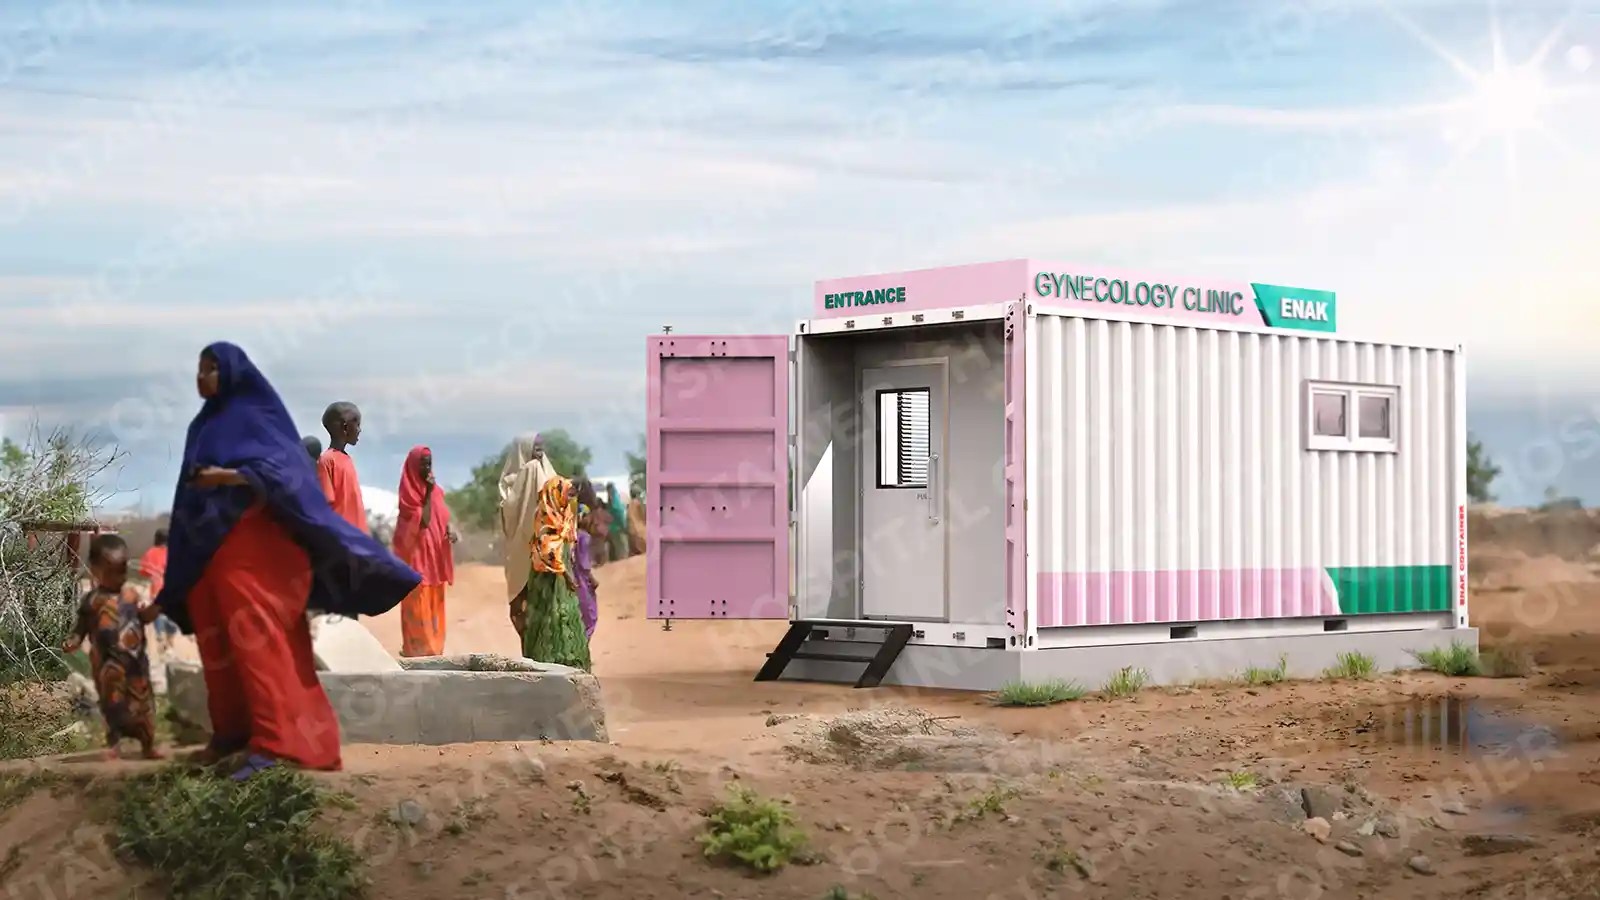 Gynecology Clinic Container